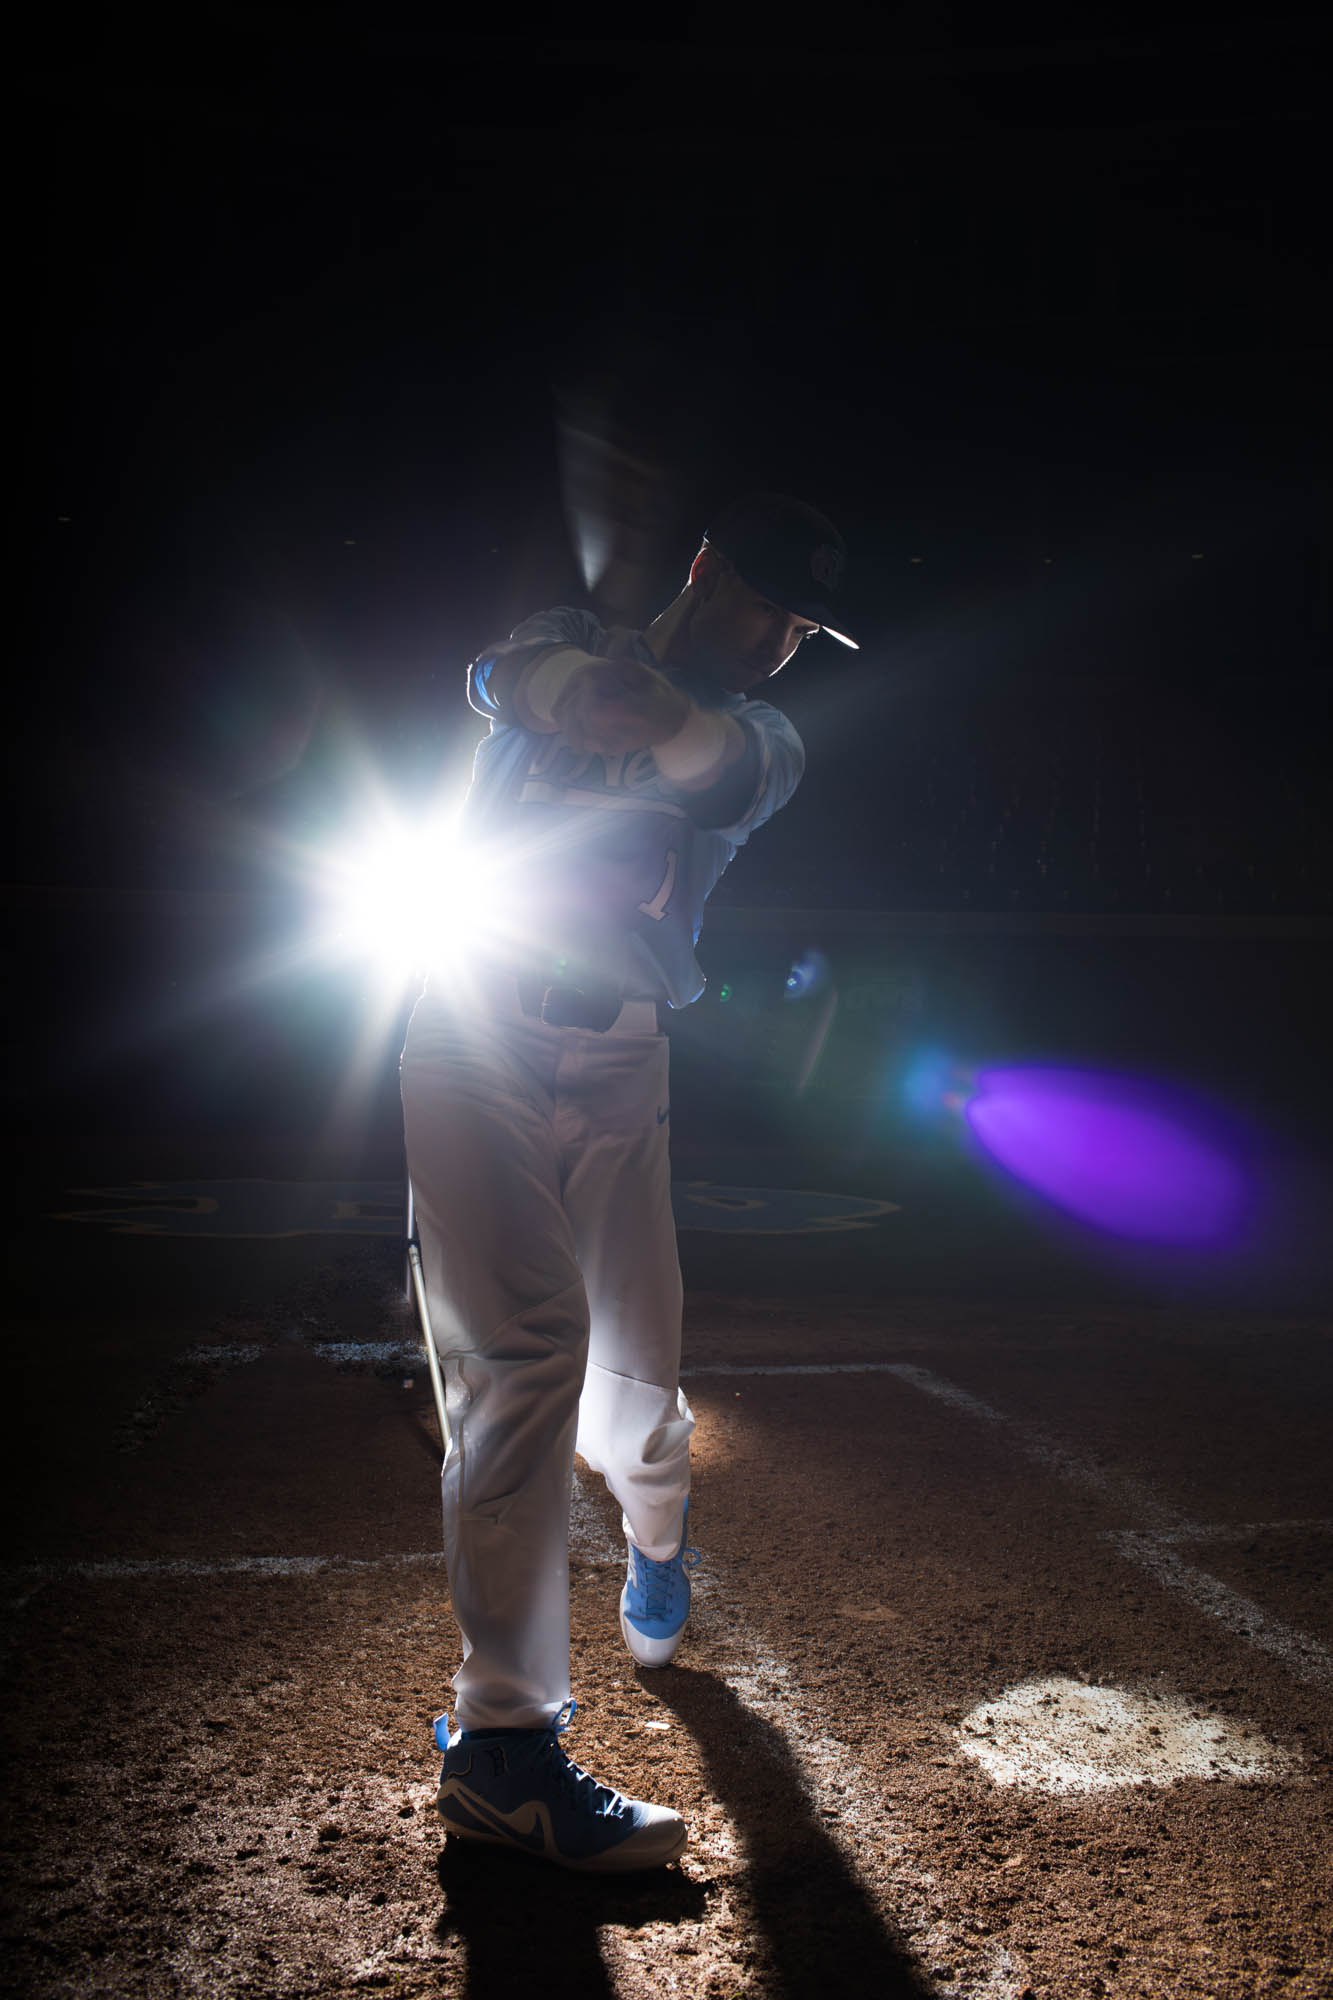  Working with multiple lights from the studio to the baseball field. 